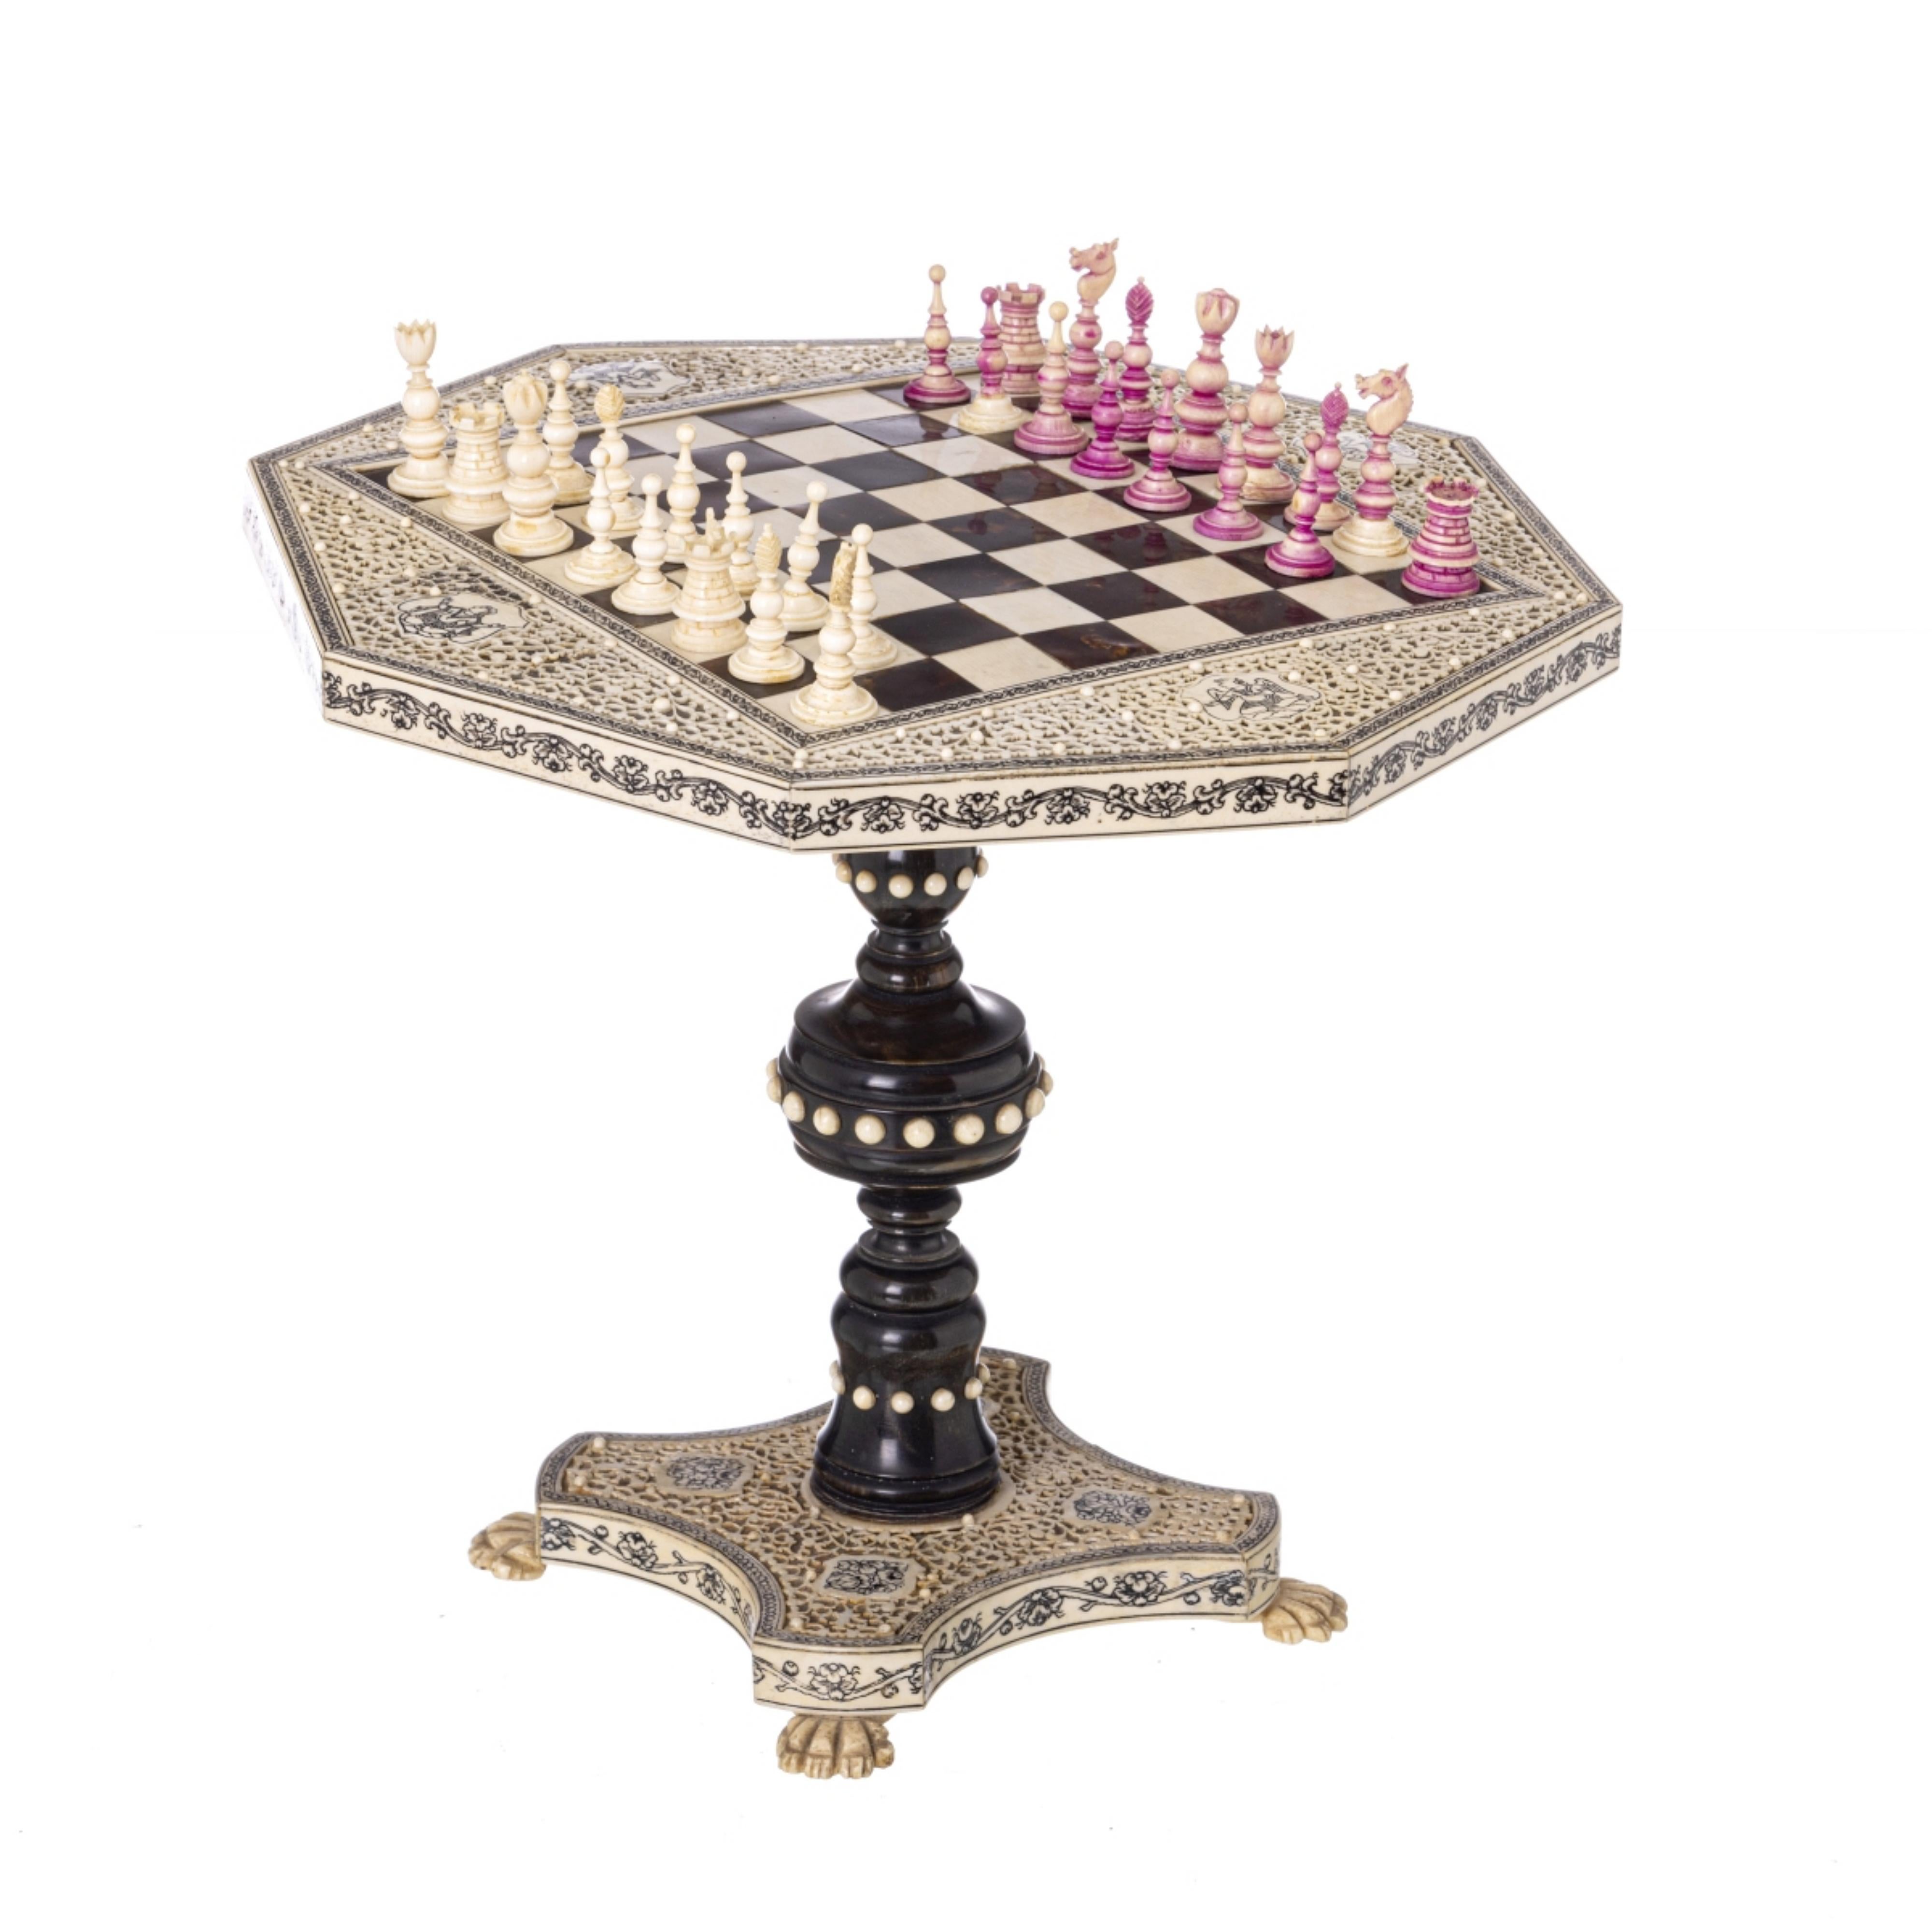 MINATURE GAME TABLE WITH CHESS PIECES

19th century Anglo-Indian 

octagonal top in wood covered with marquetry,
borders with lace applications and engraved in black 